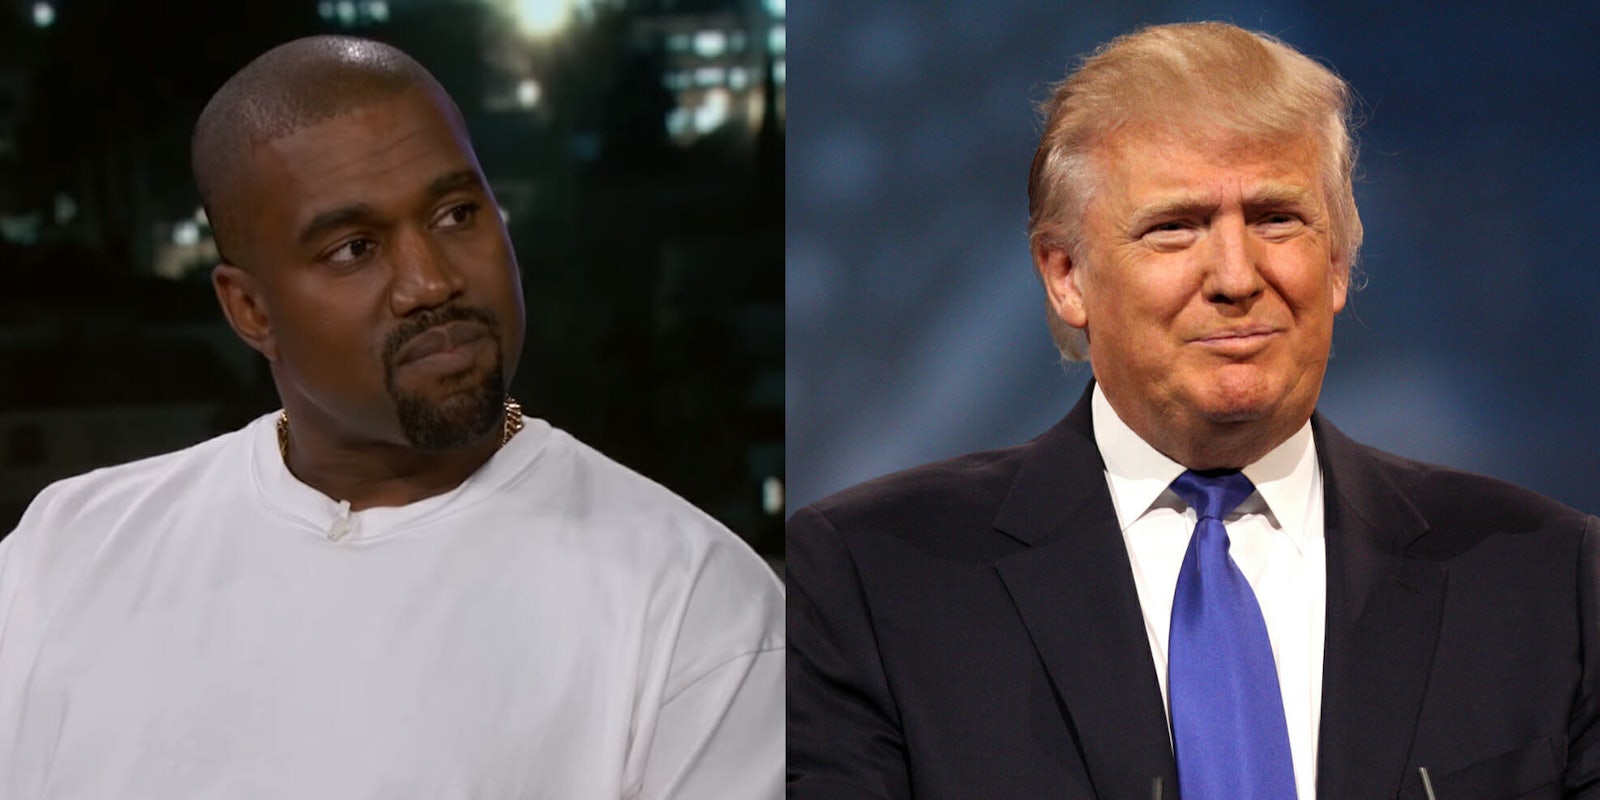 President Donald Trump will meet with Kanye West later this week.